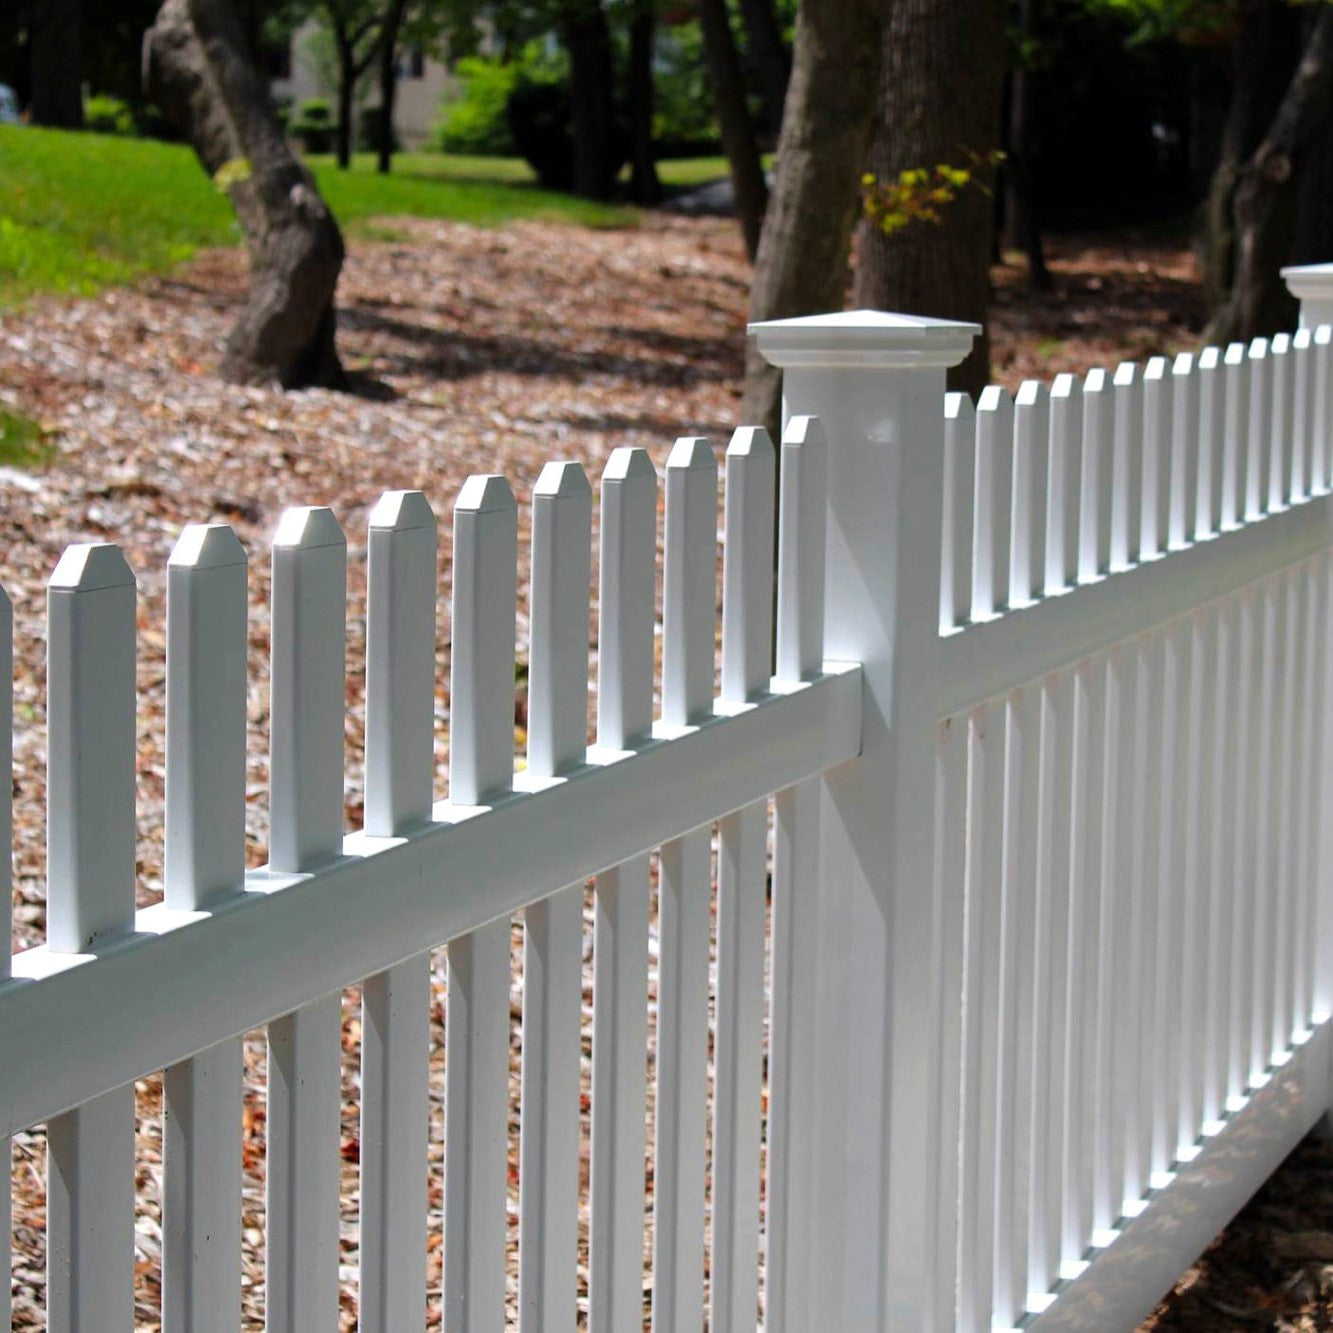 Silverbell Haven Series - Fence Panel - 4' x 8'-Vinyl Fence Panels-ActiveYards-White-FenceCenter